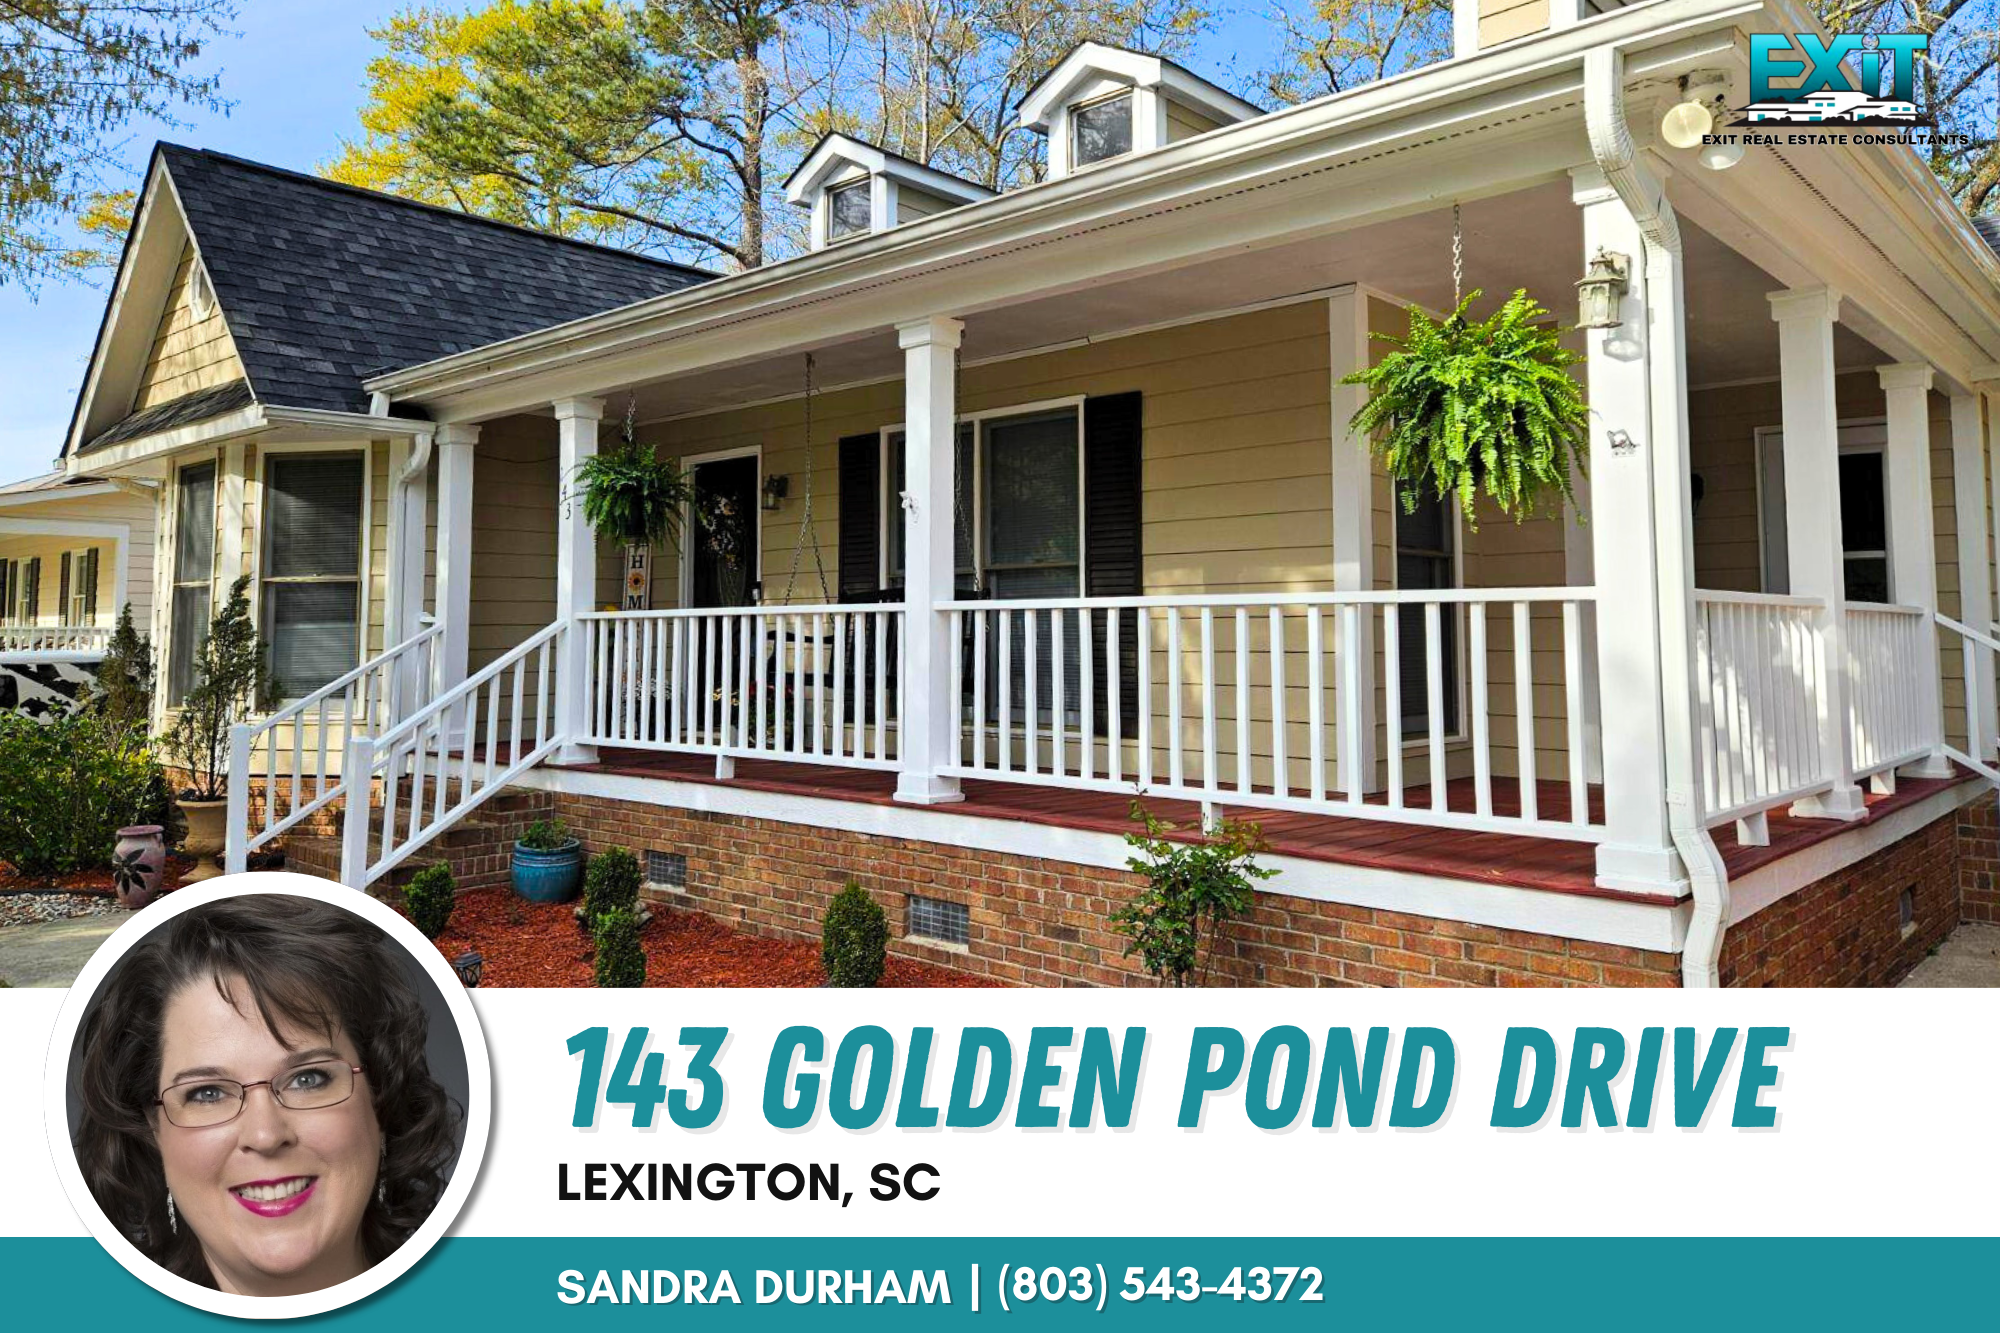 Just listed in Golden Pond